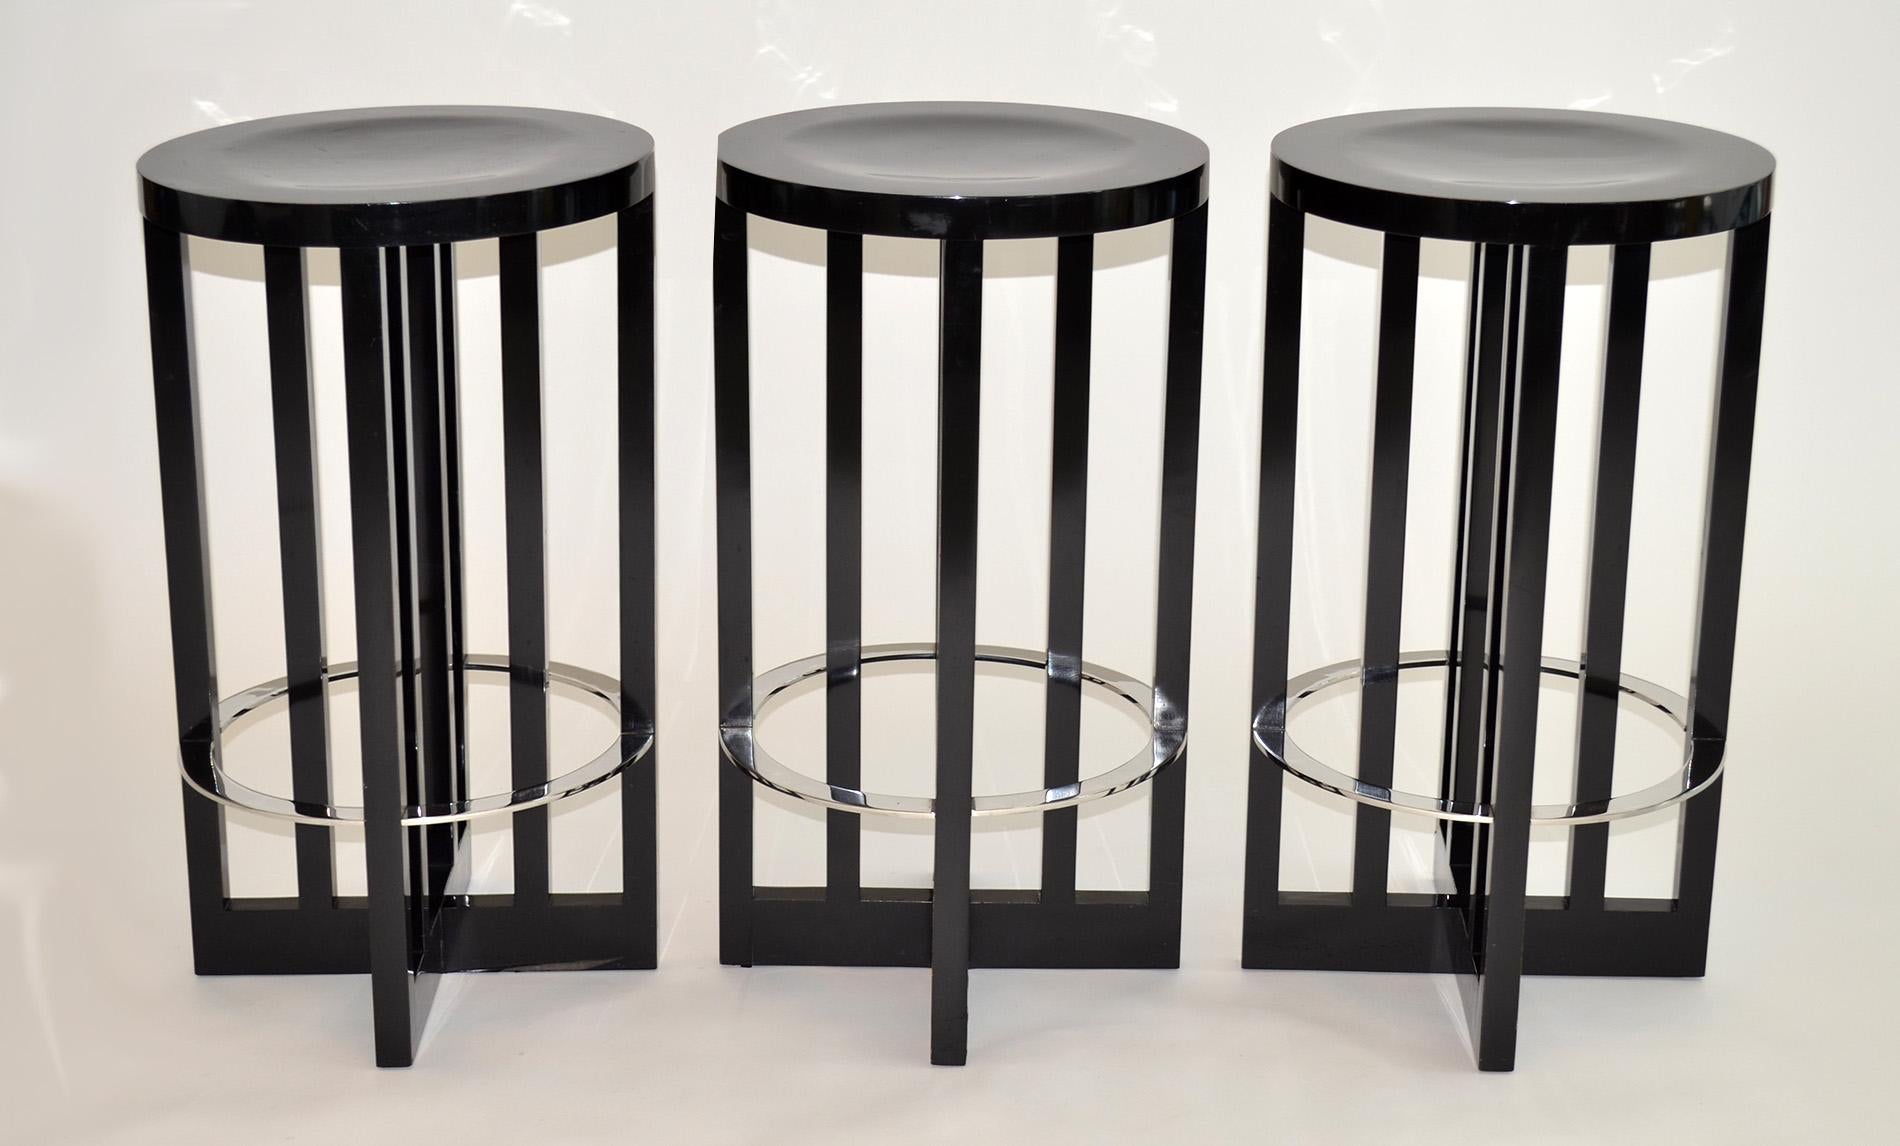 Set of three high bar stools by Richard Meier for Knoll 1982 in laminated hard maple veneer and stainless steel produced for Knoll International. All signed.
        